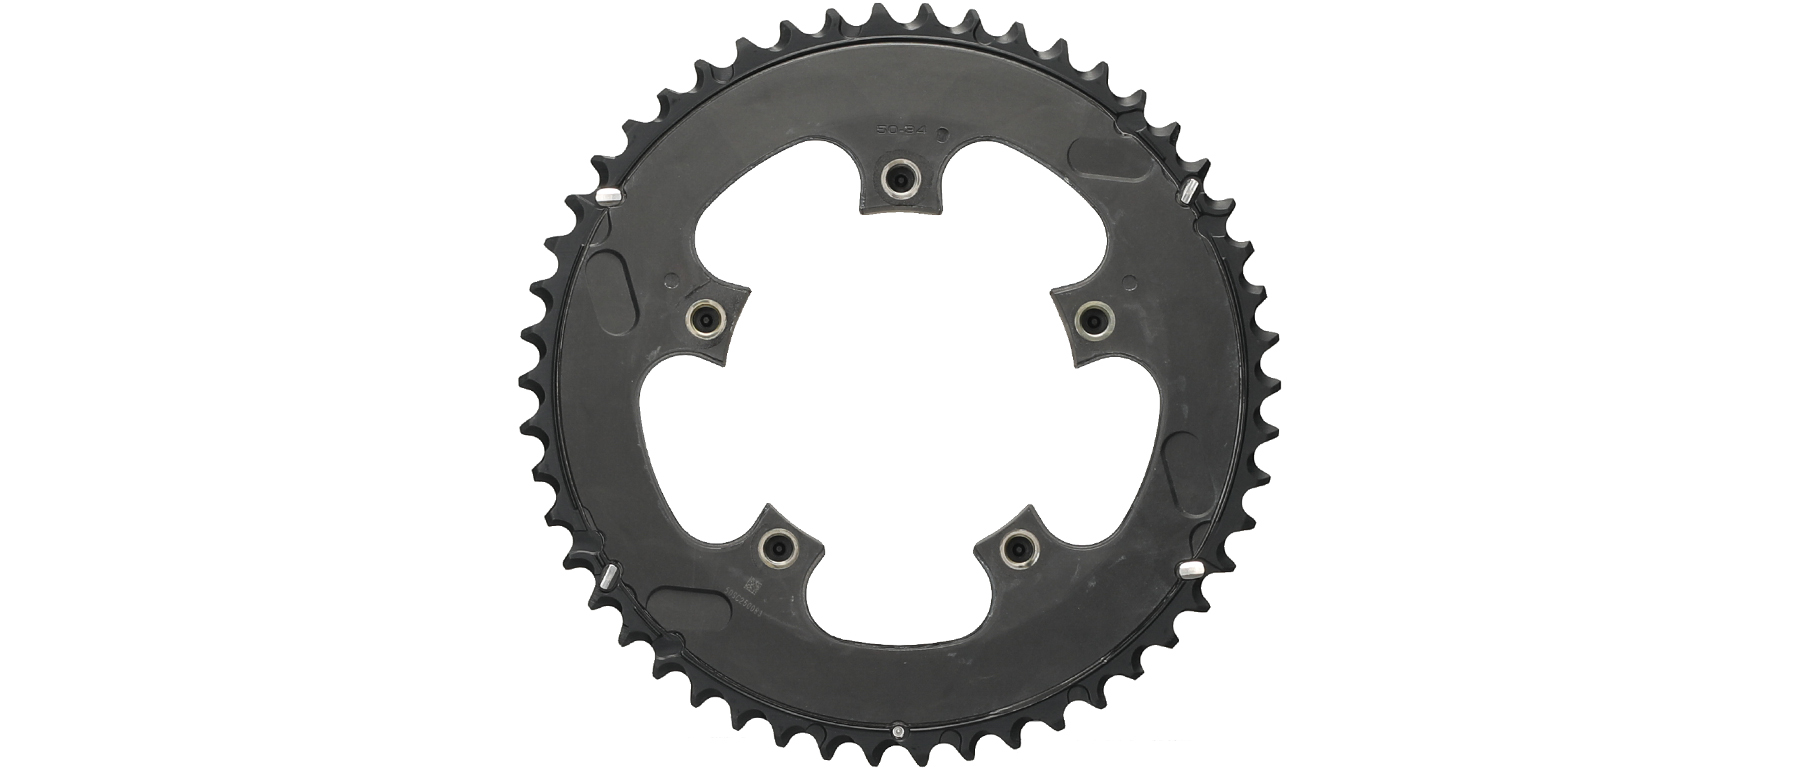 Shimano Ultegra FC-6750 Outer Chainring